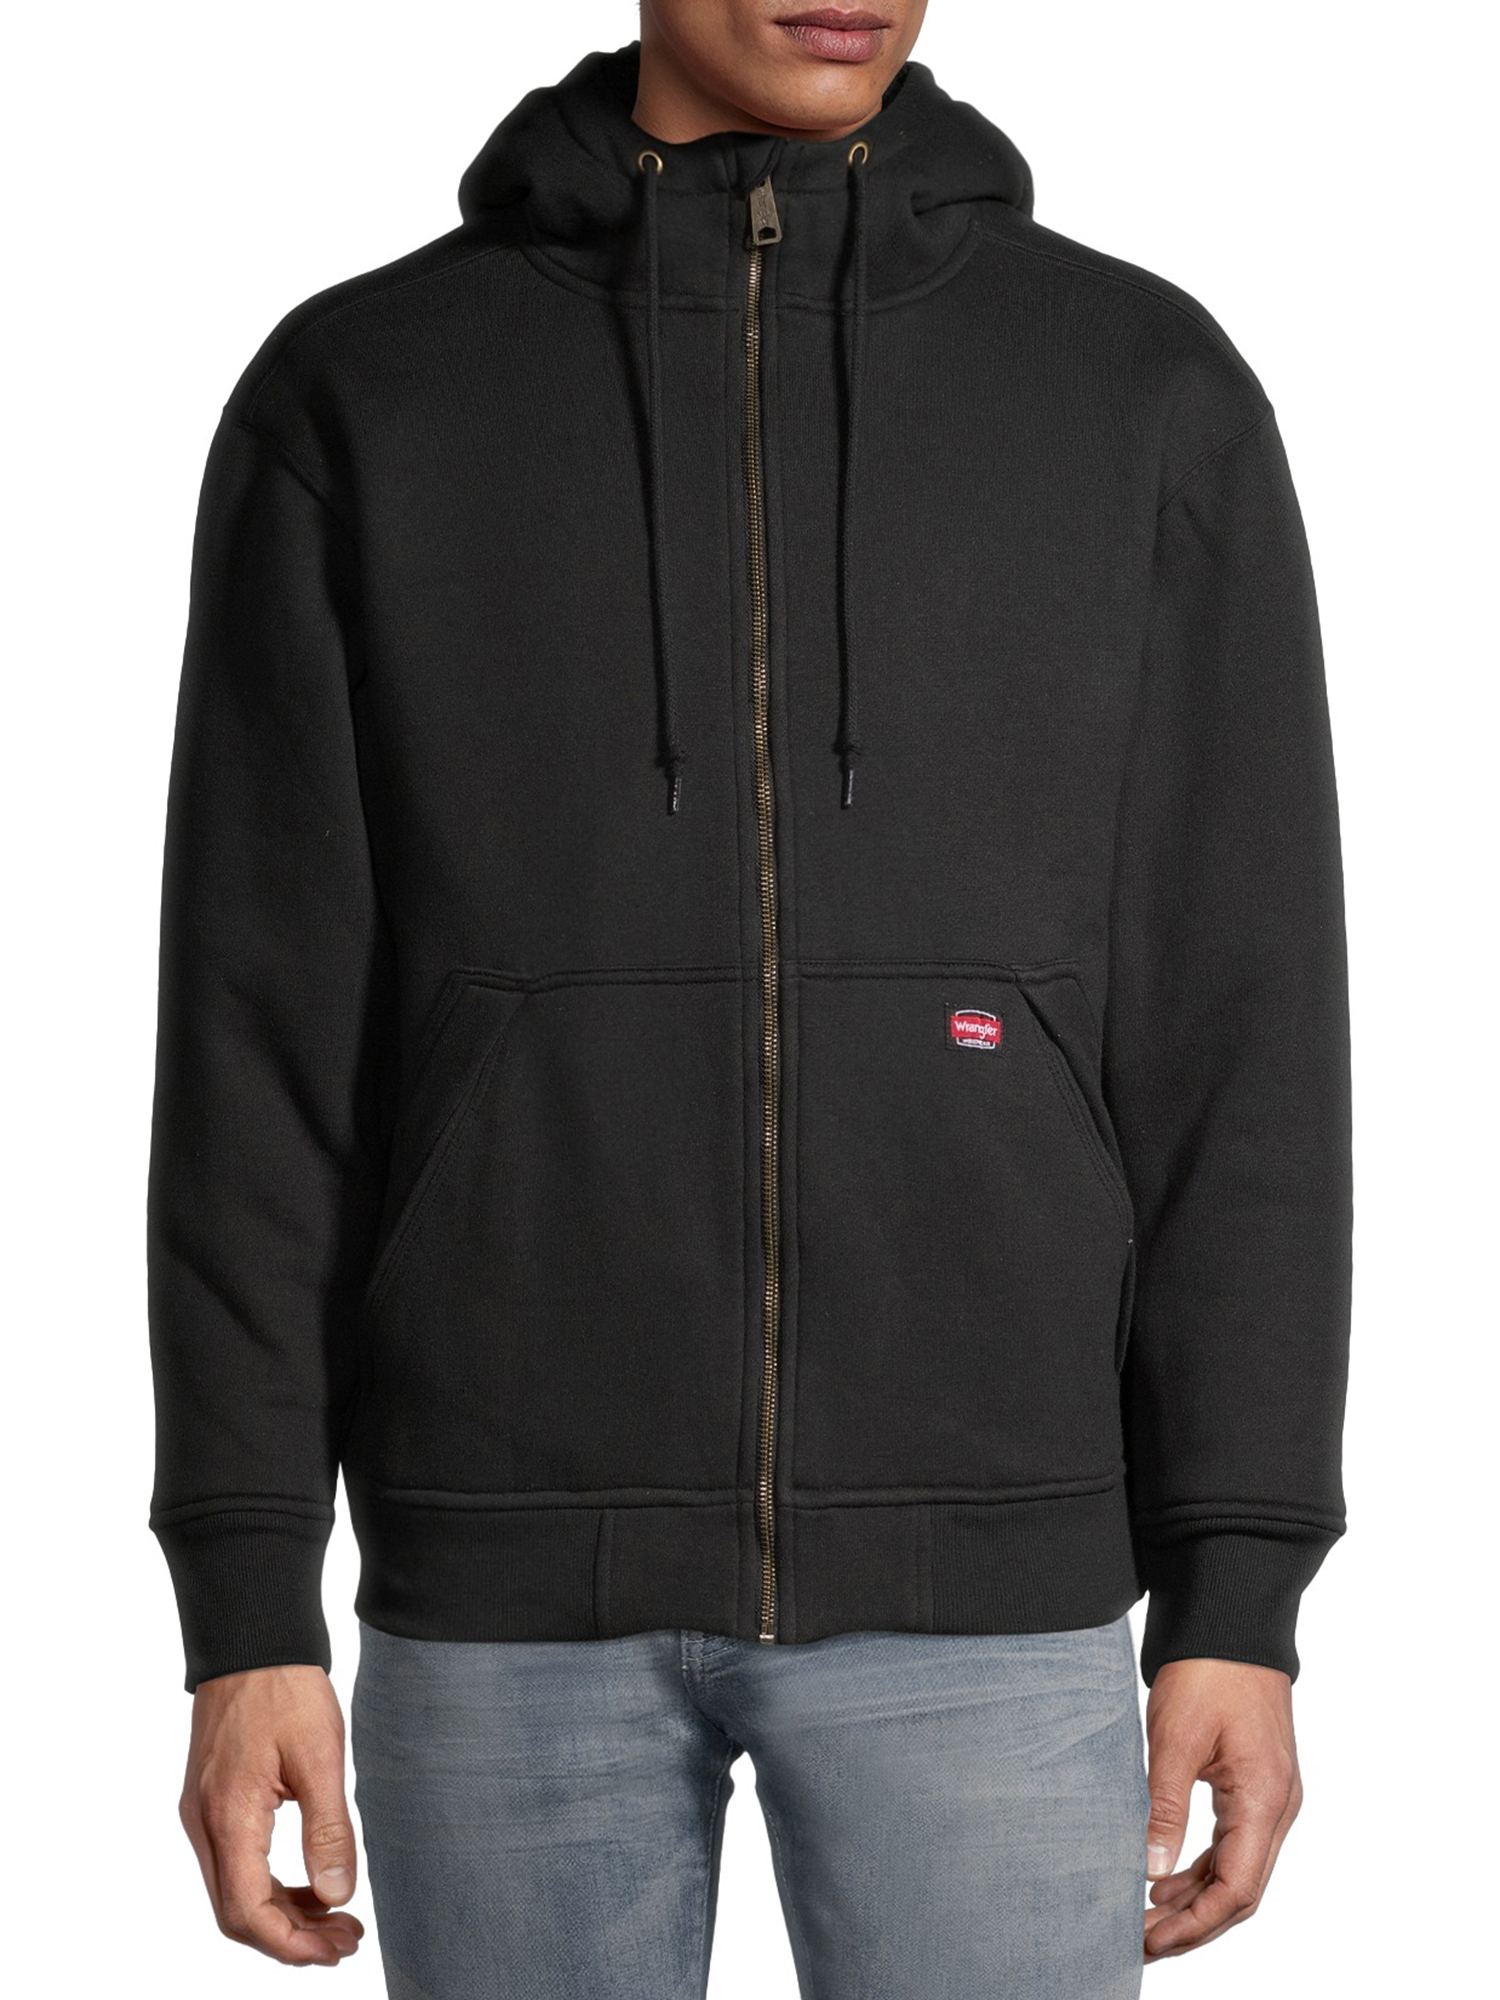 Wrangler Workwear Men's Guardian Heavy Weight Faux Sherpa and Quilt Lined Hoodie - image 1 of 5